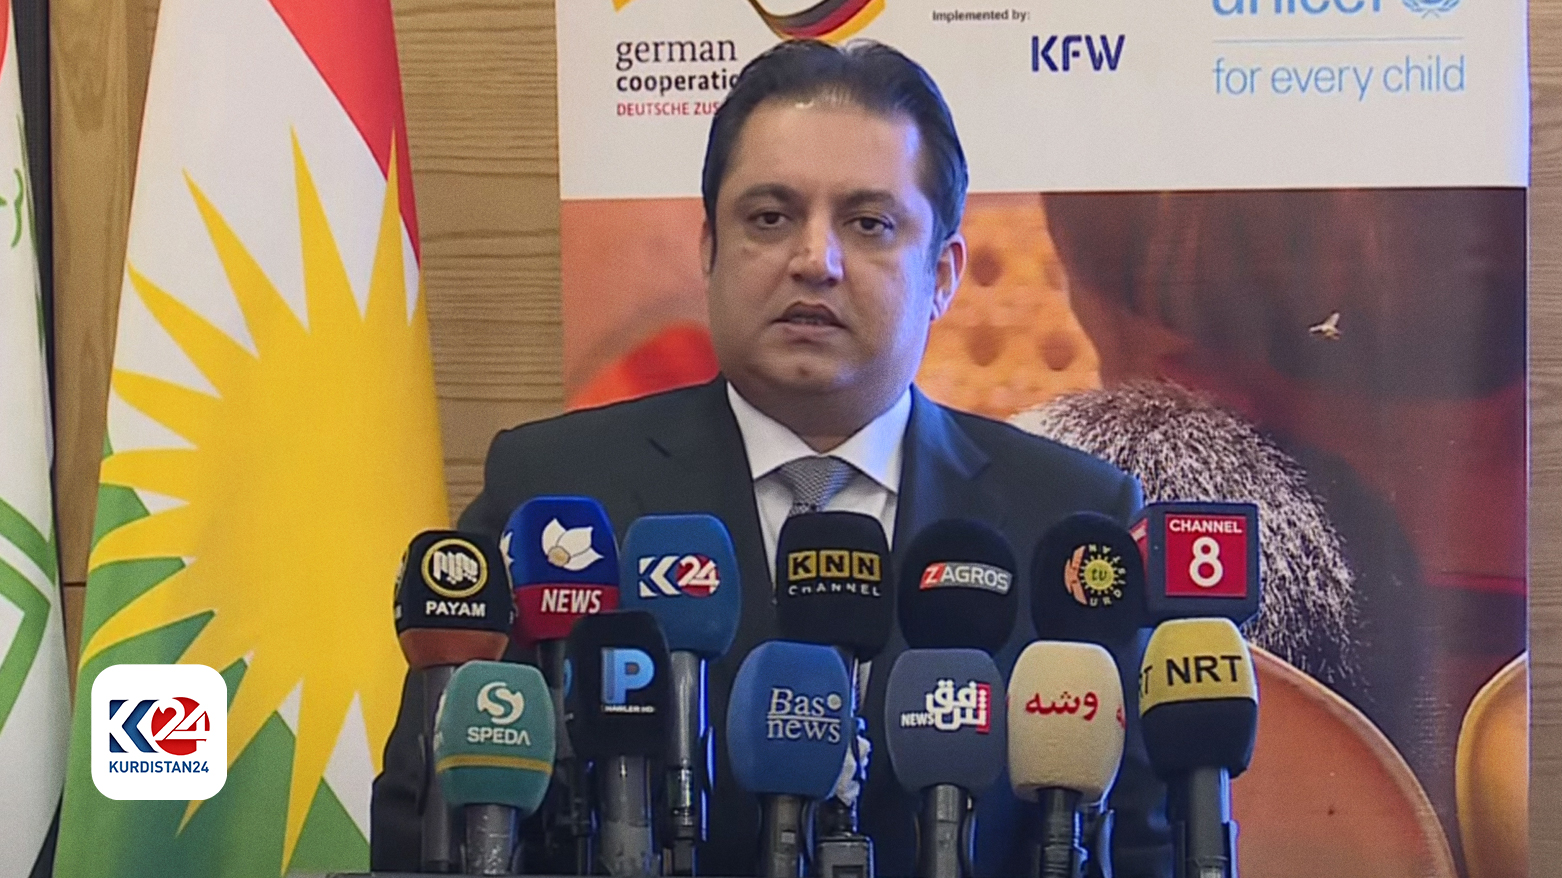 Minister of Education, Alan Hama Saeed, speaks in a media conference. (Photo: Kurdistan 24)